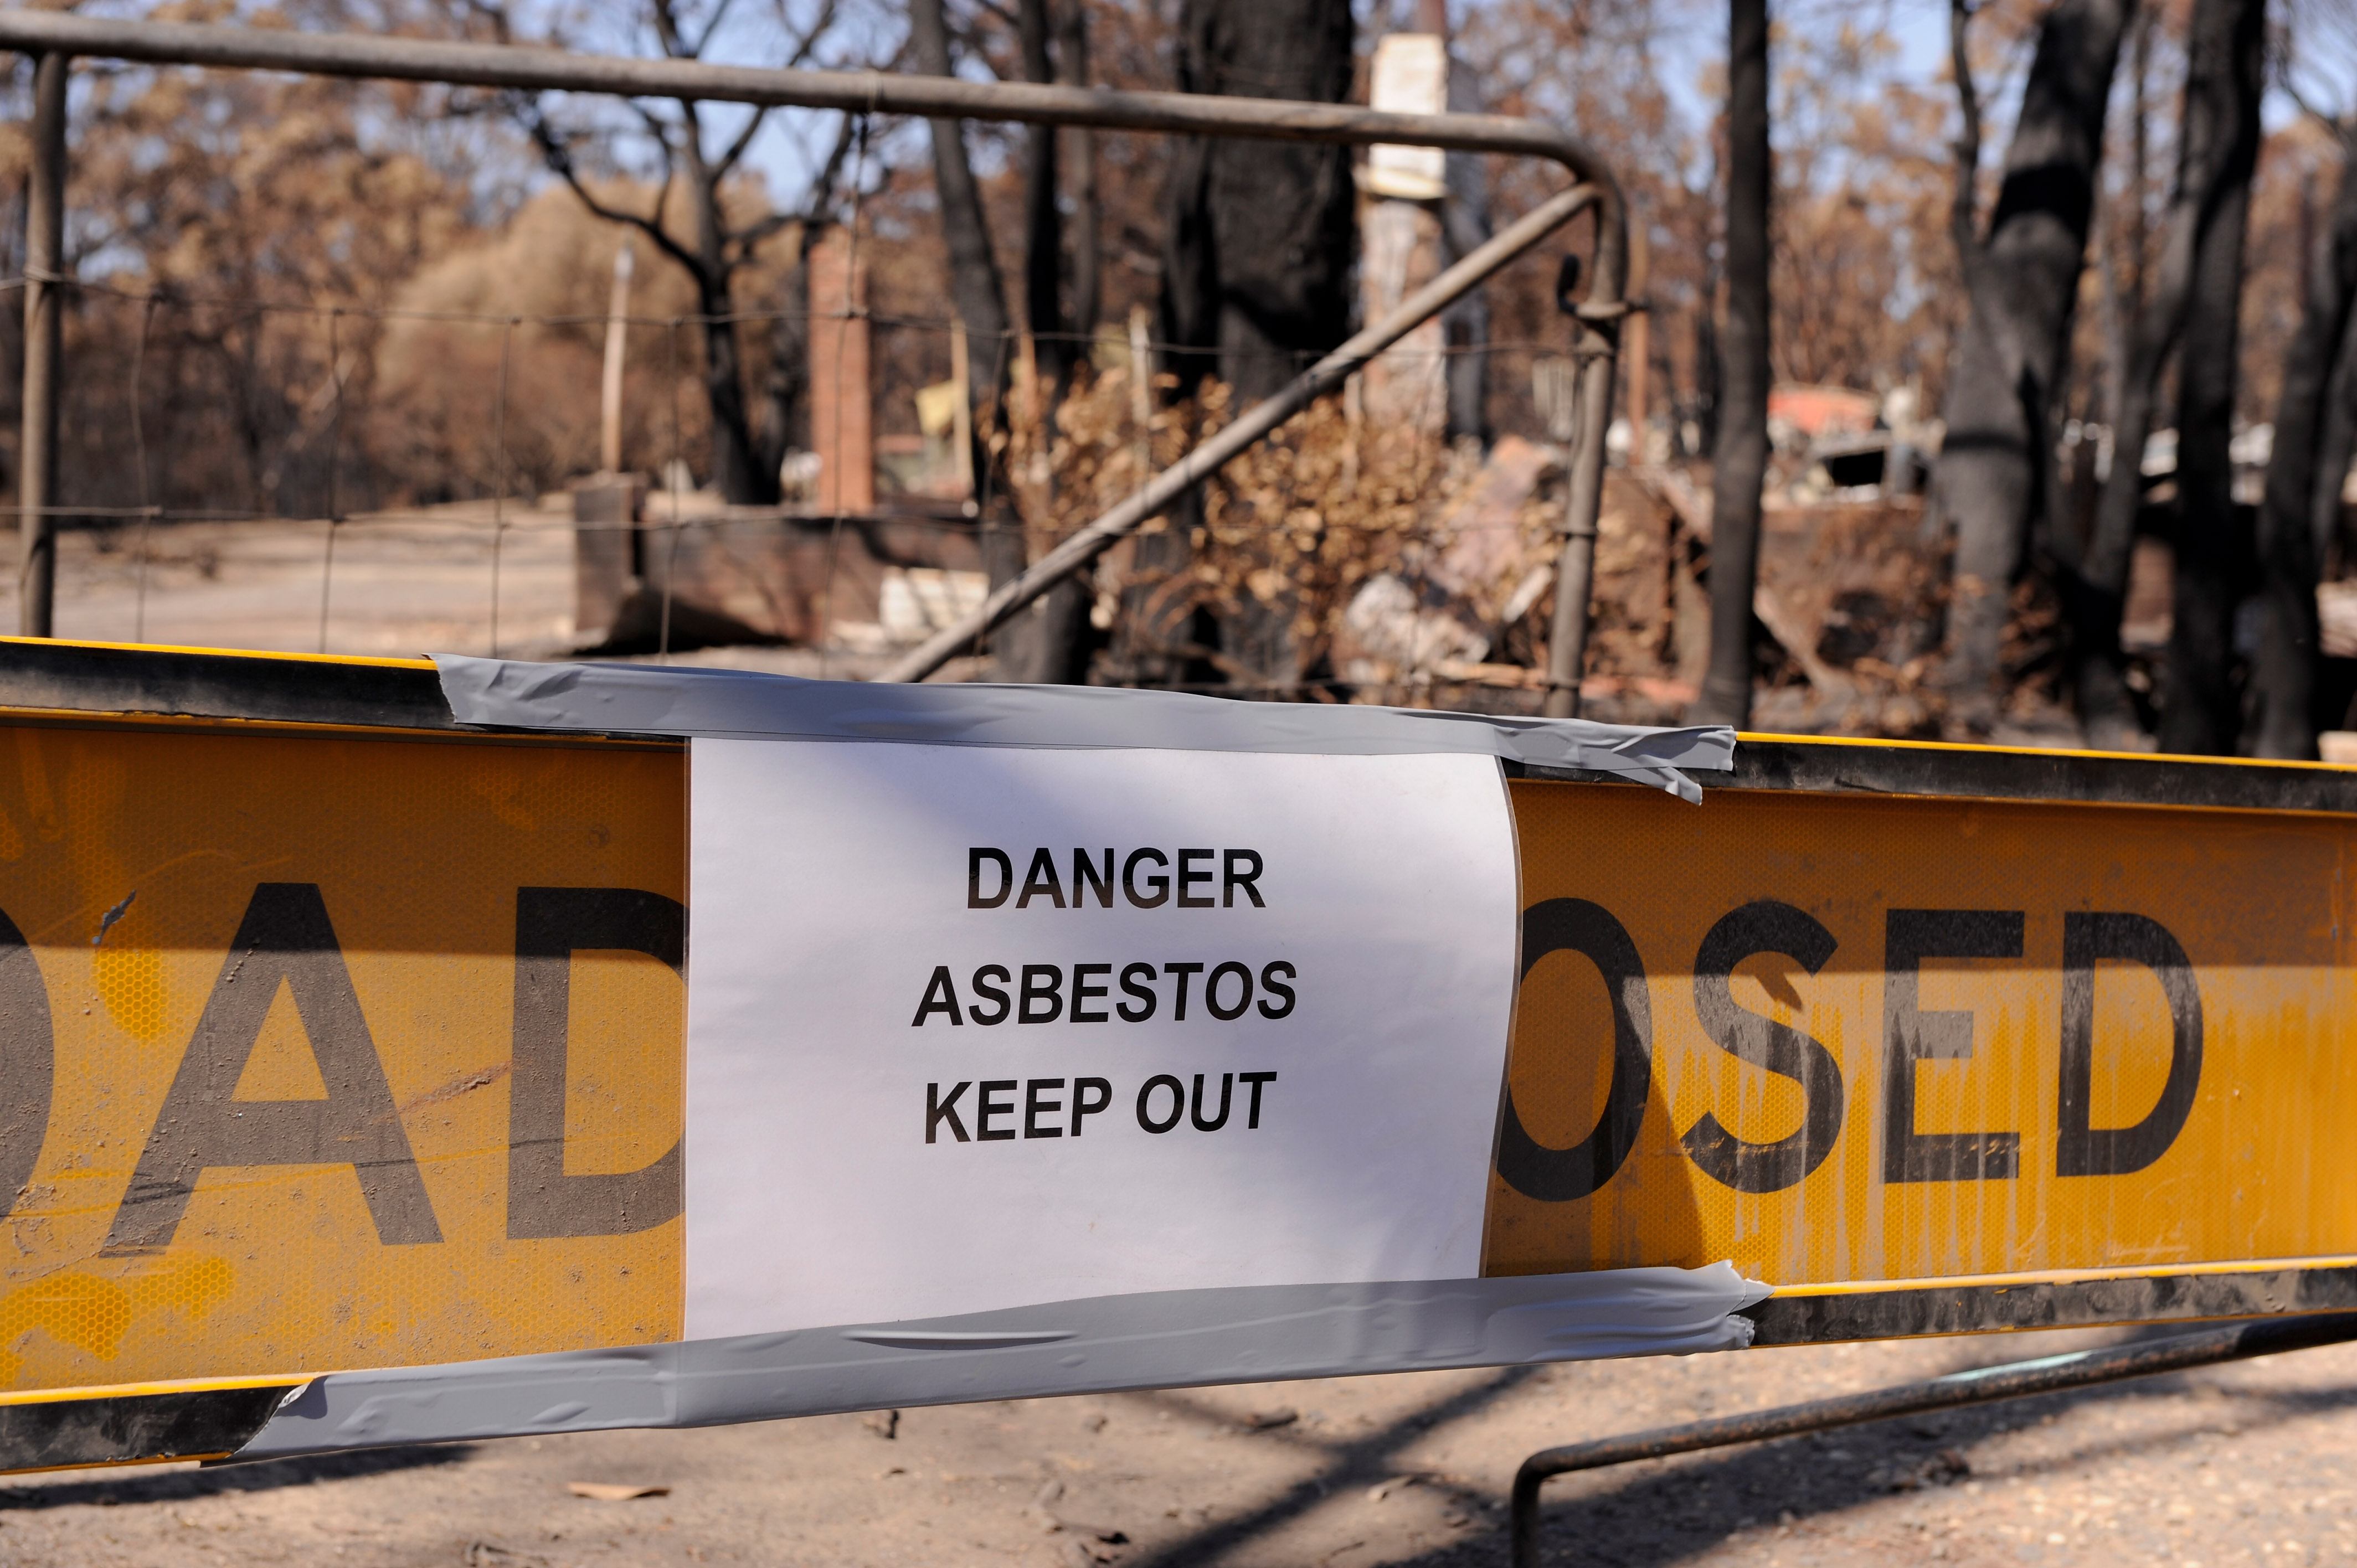 15 American States Had More than 100,000 Asbestos Deaths in 15 Years